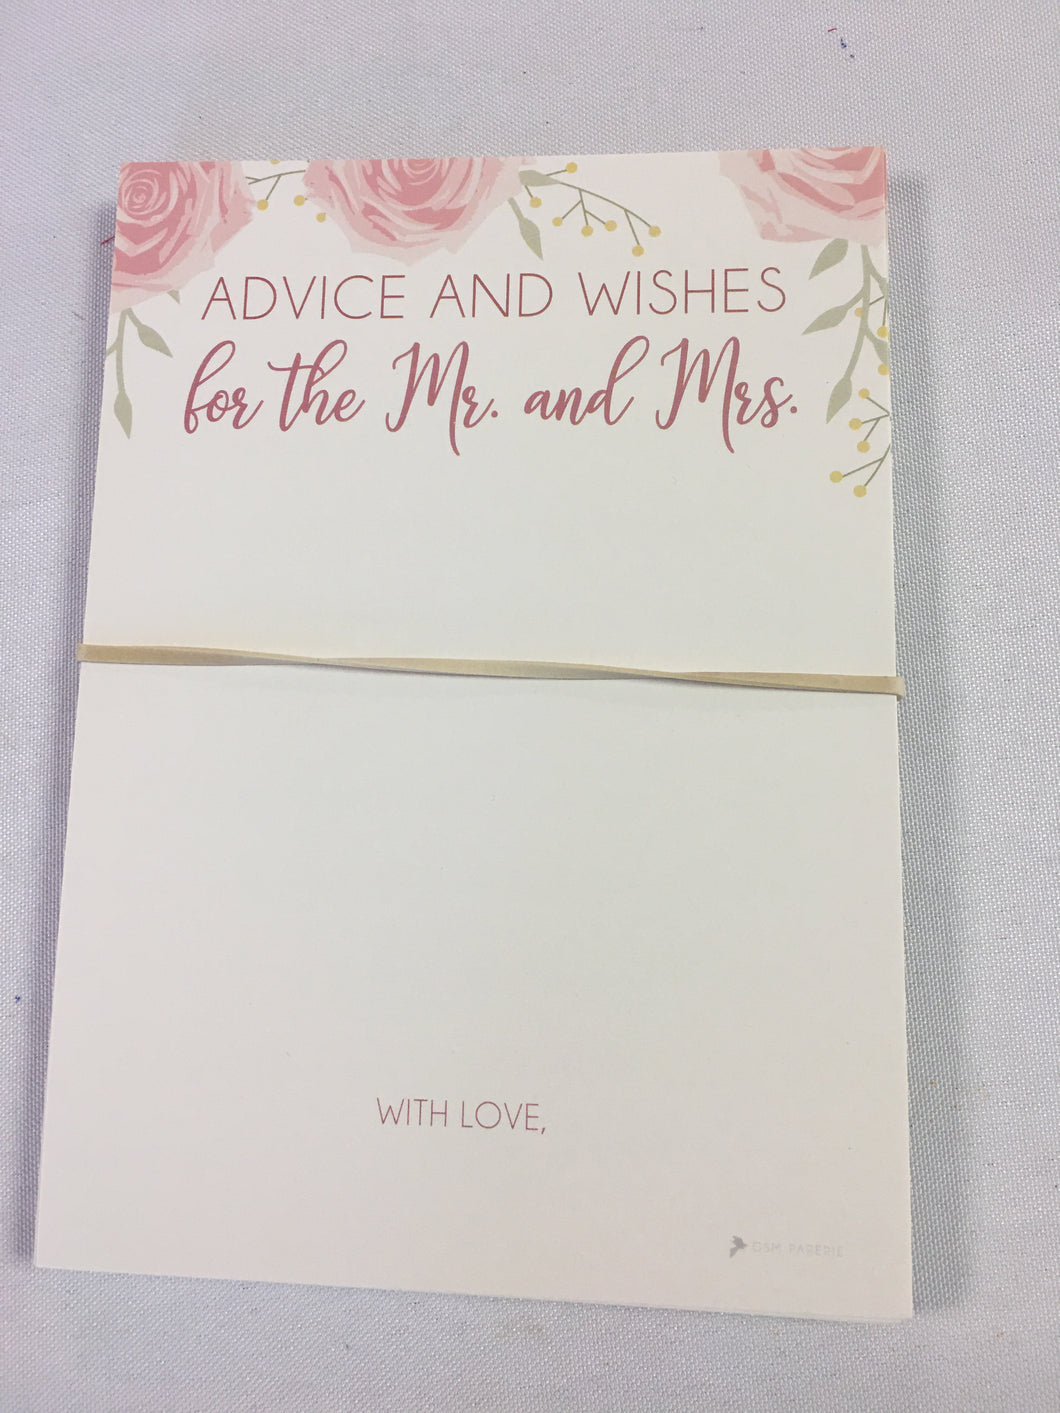 HAMM100-D Advice & Wishes for the Mr and Mrs Cards